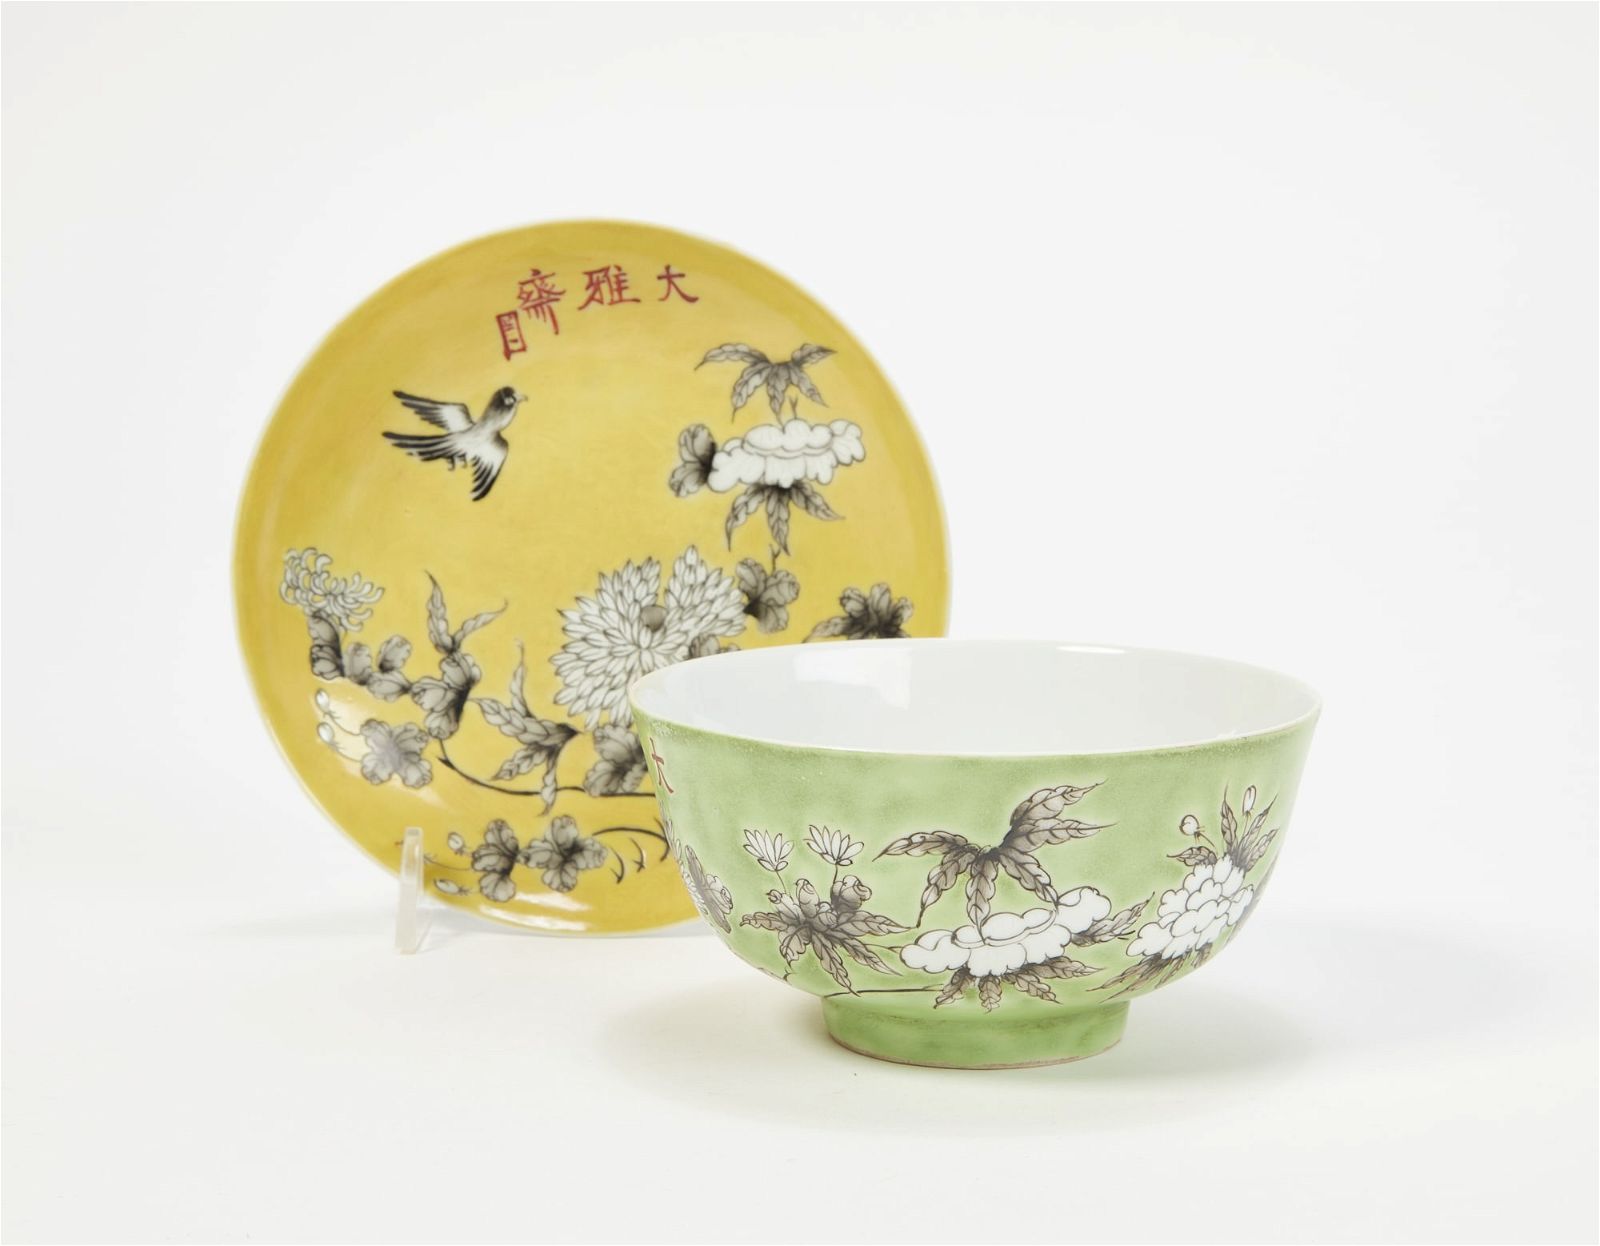 A CHINESE PORCELAIN DISH AND BOWLA 2fb2d7f